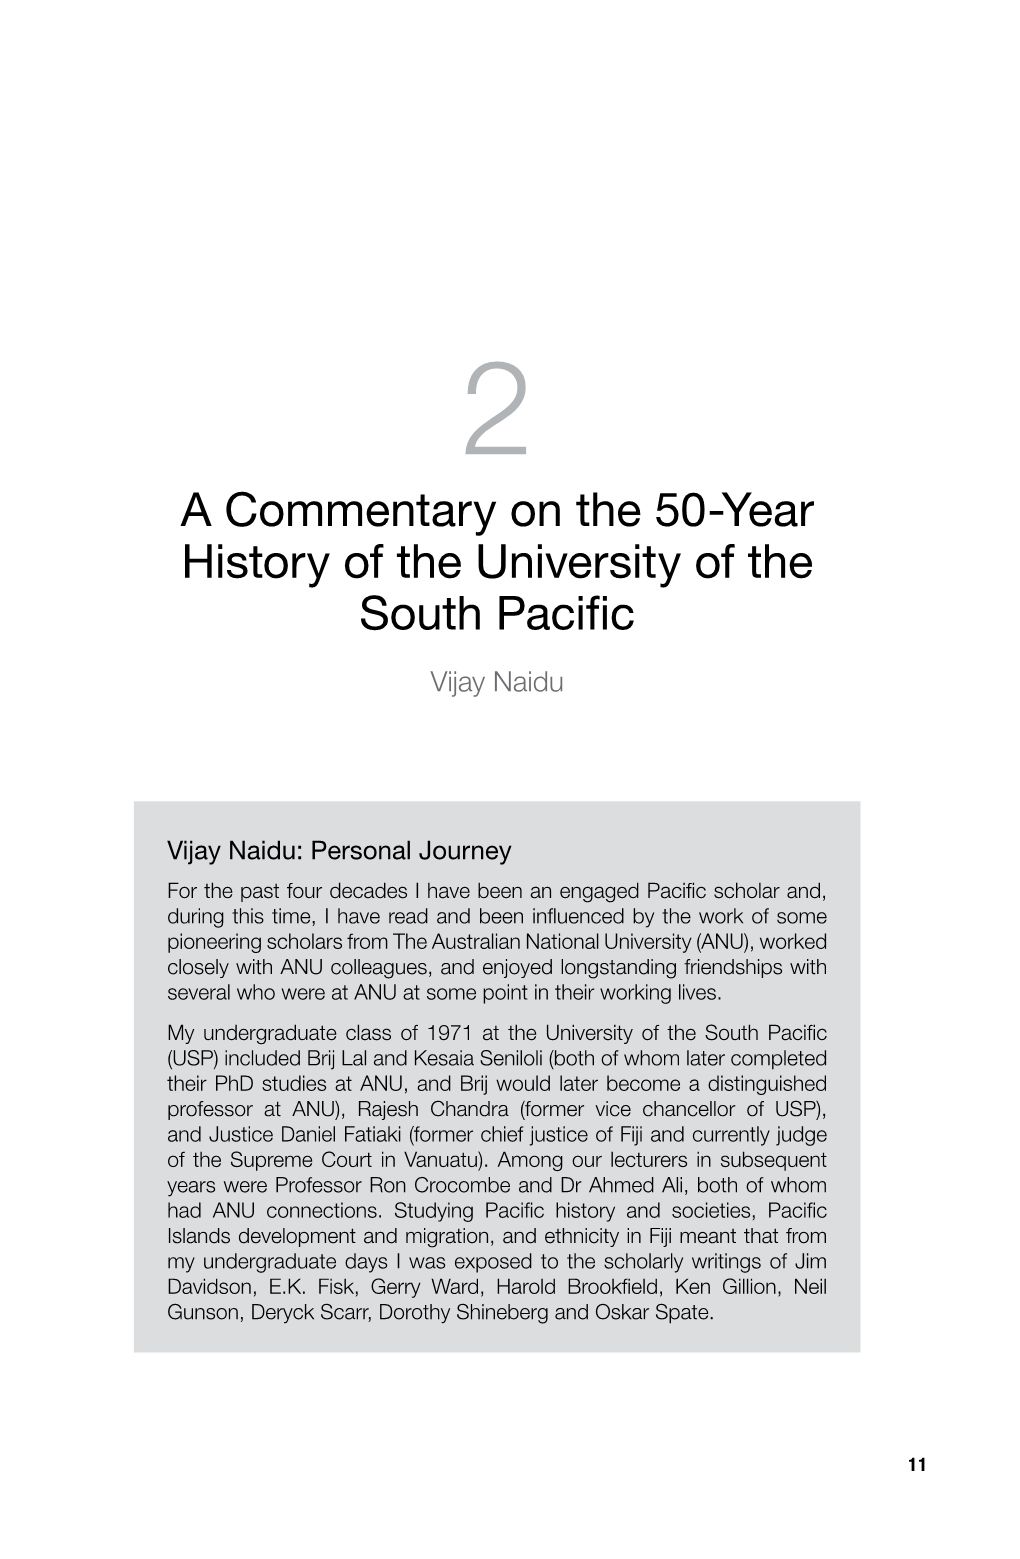 2. a Commentary on the 50-Year History of the University of the South Pacific